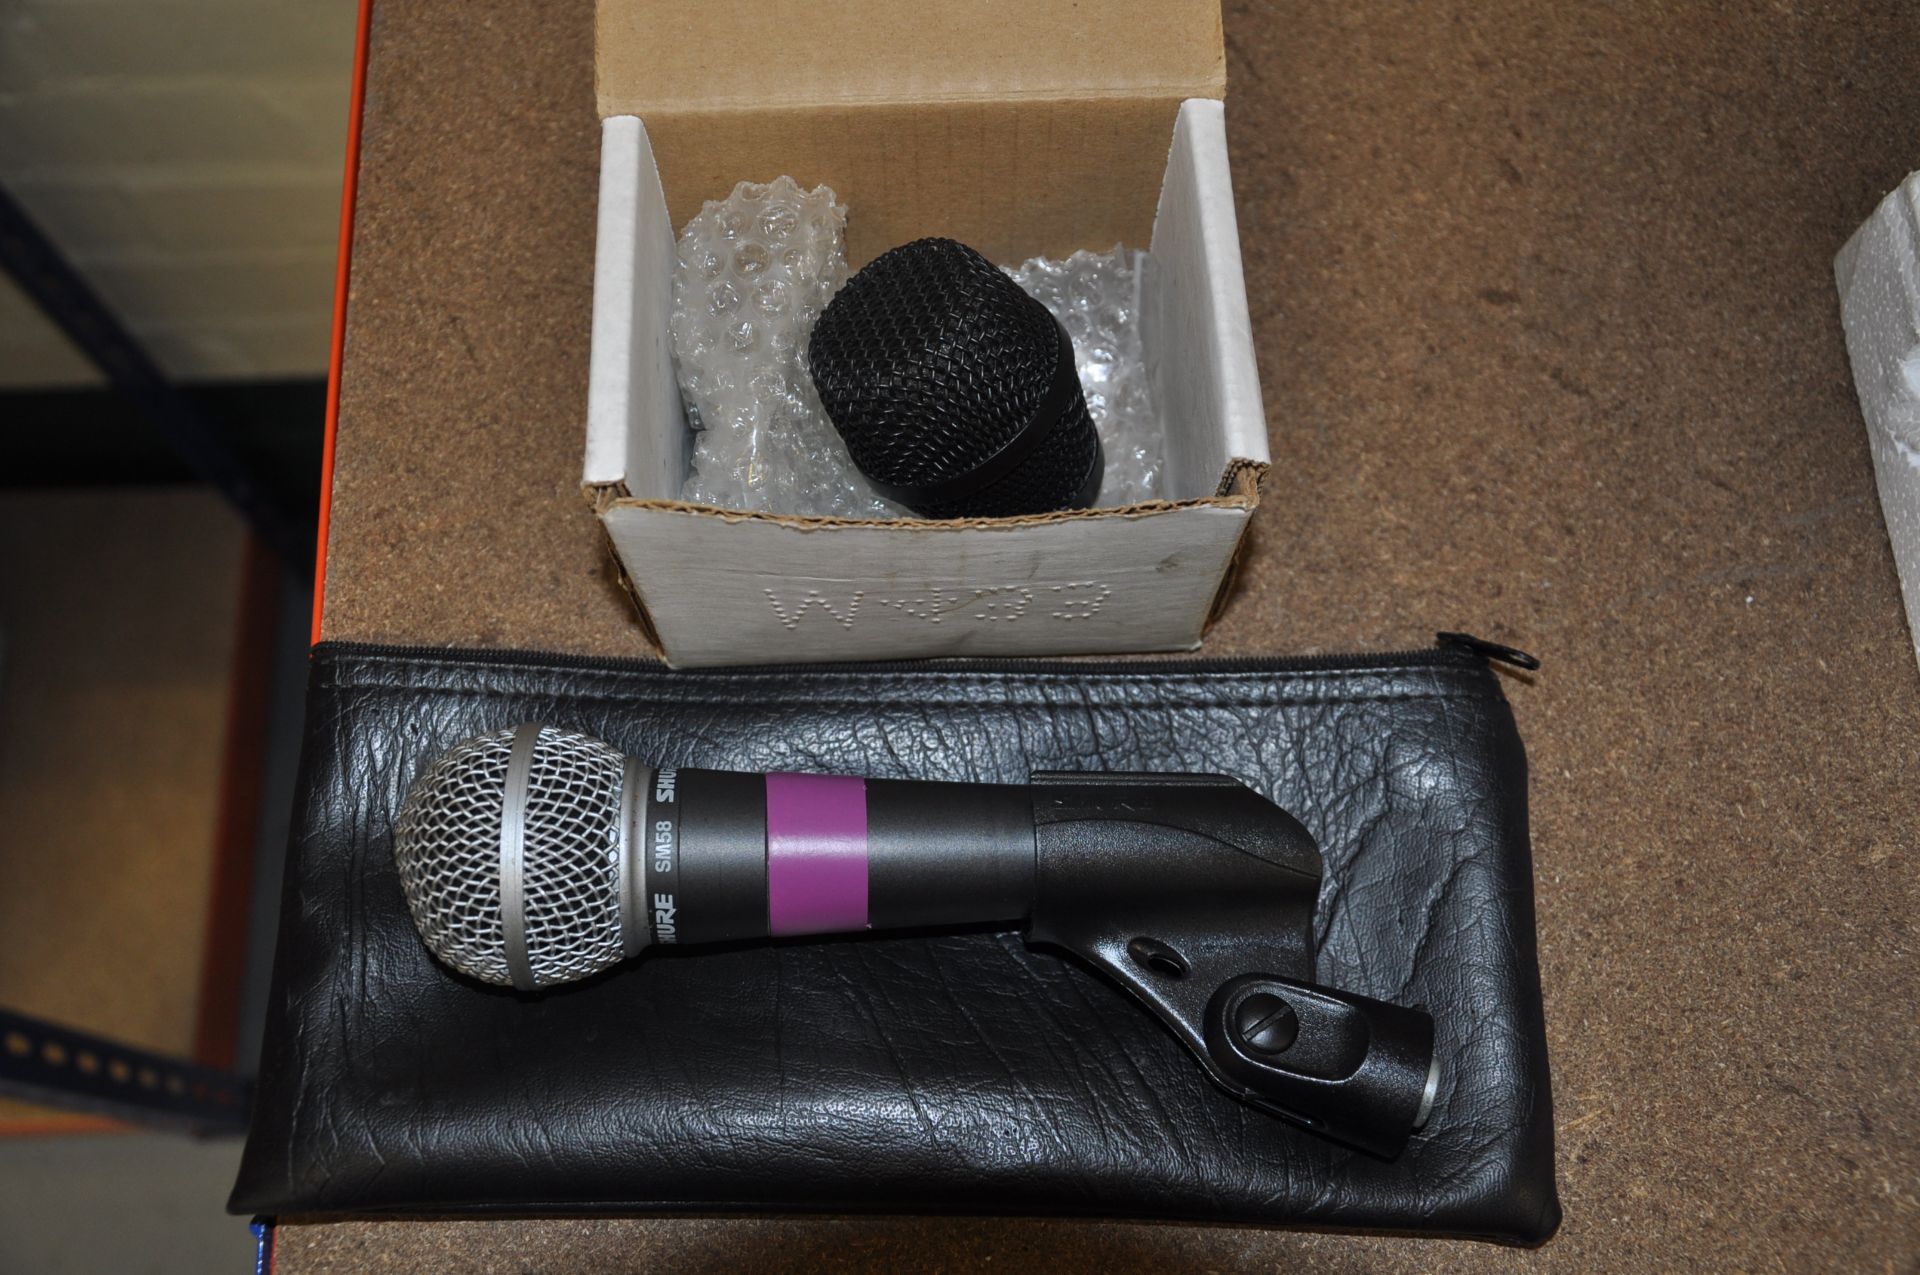 Shure SM58 microphone with spare head